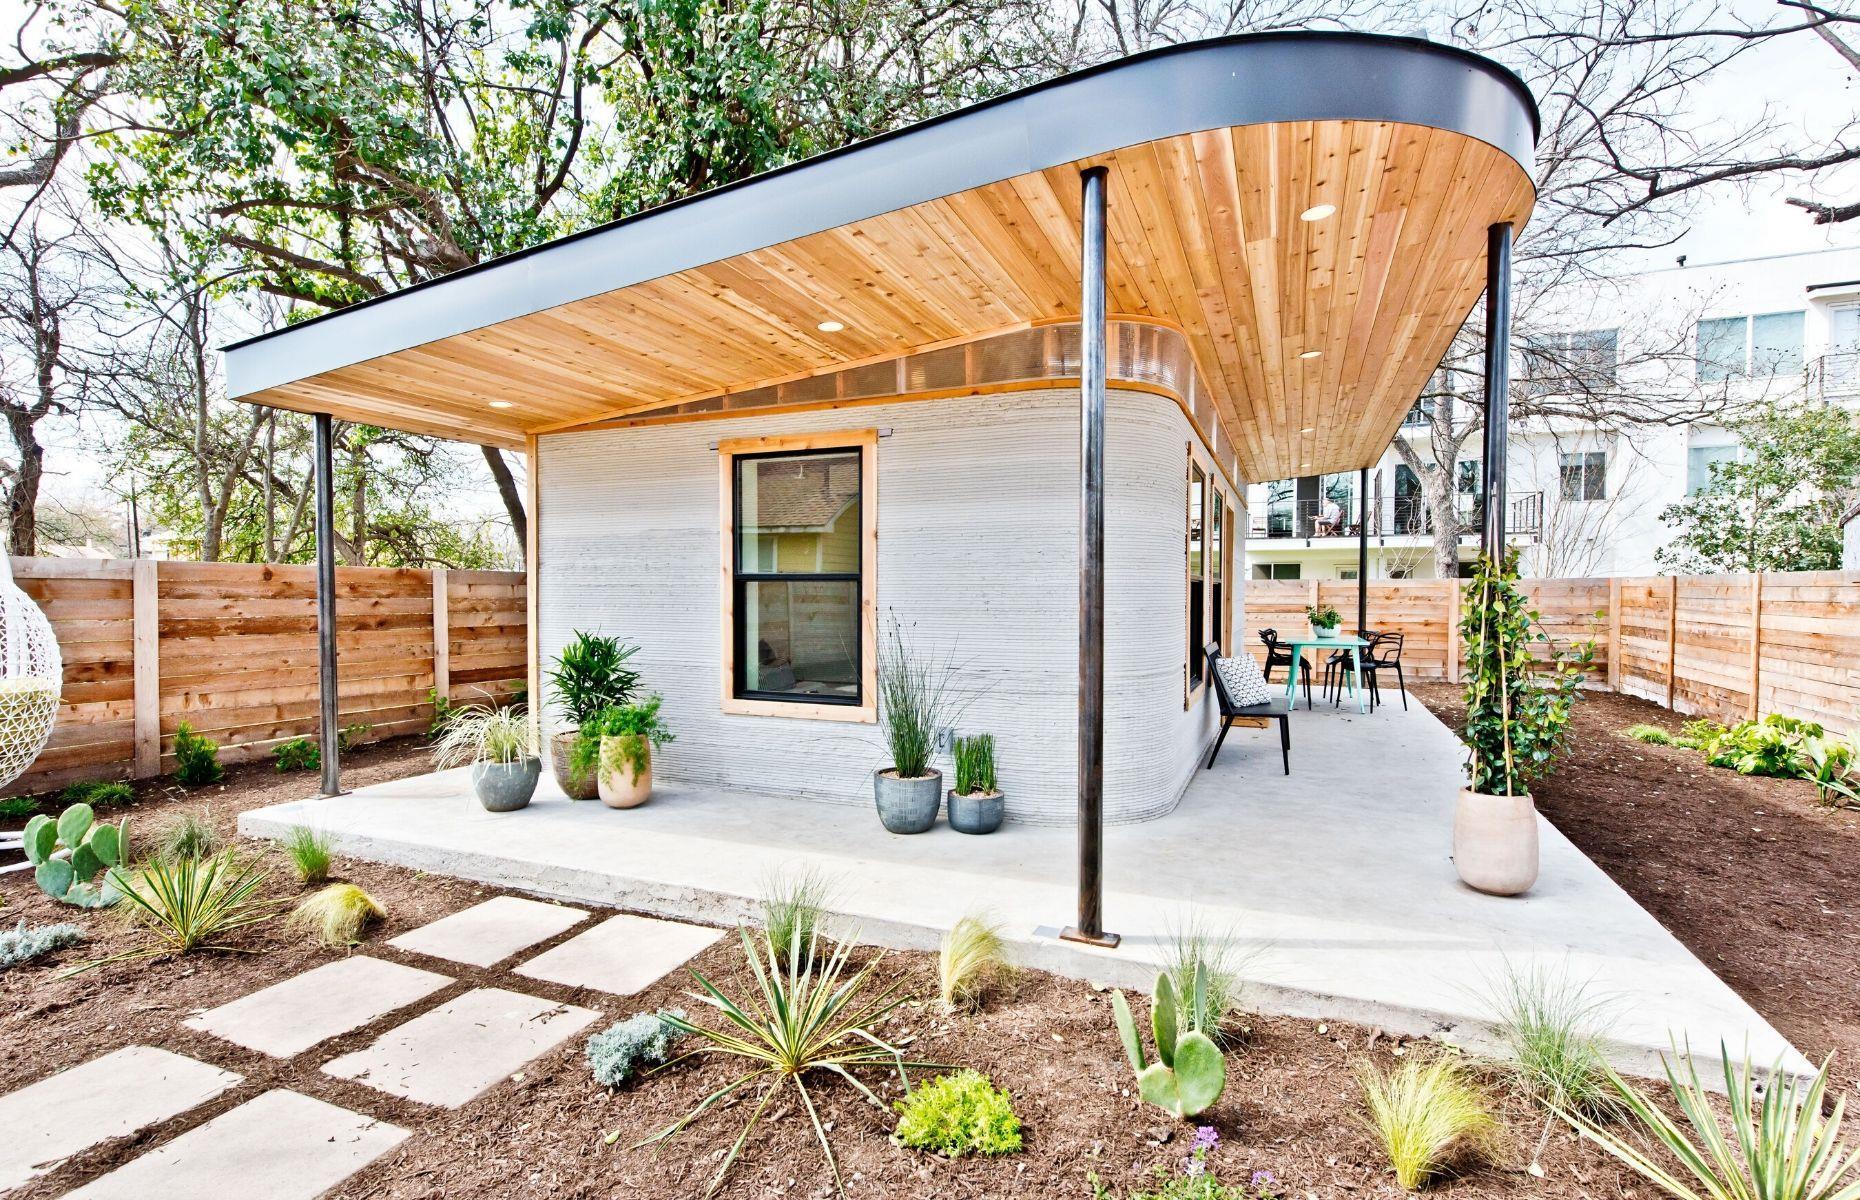 <p>This beautiful tiny home can be found in Austin, Texas, and is far more than it first appears. Known as Chicon House, the award-winning property was the first <a href="https://www.loveproperty.com/gallerylist/76117/3d-printed-homes-you-d-actually-want-to-live-in">3D-printed home</a> to be built in America, making it ground-breaking as well as stunning. </p>  <p>Quick to assemble, affordable and resilient, it's hoped that the 3D-printed home will offer a solution to the world's homelessness crisis.</p>